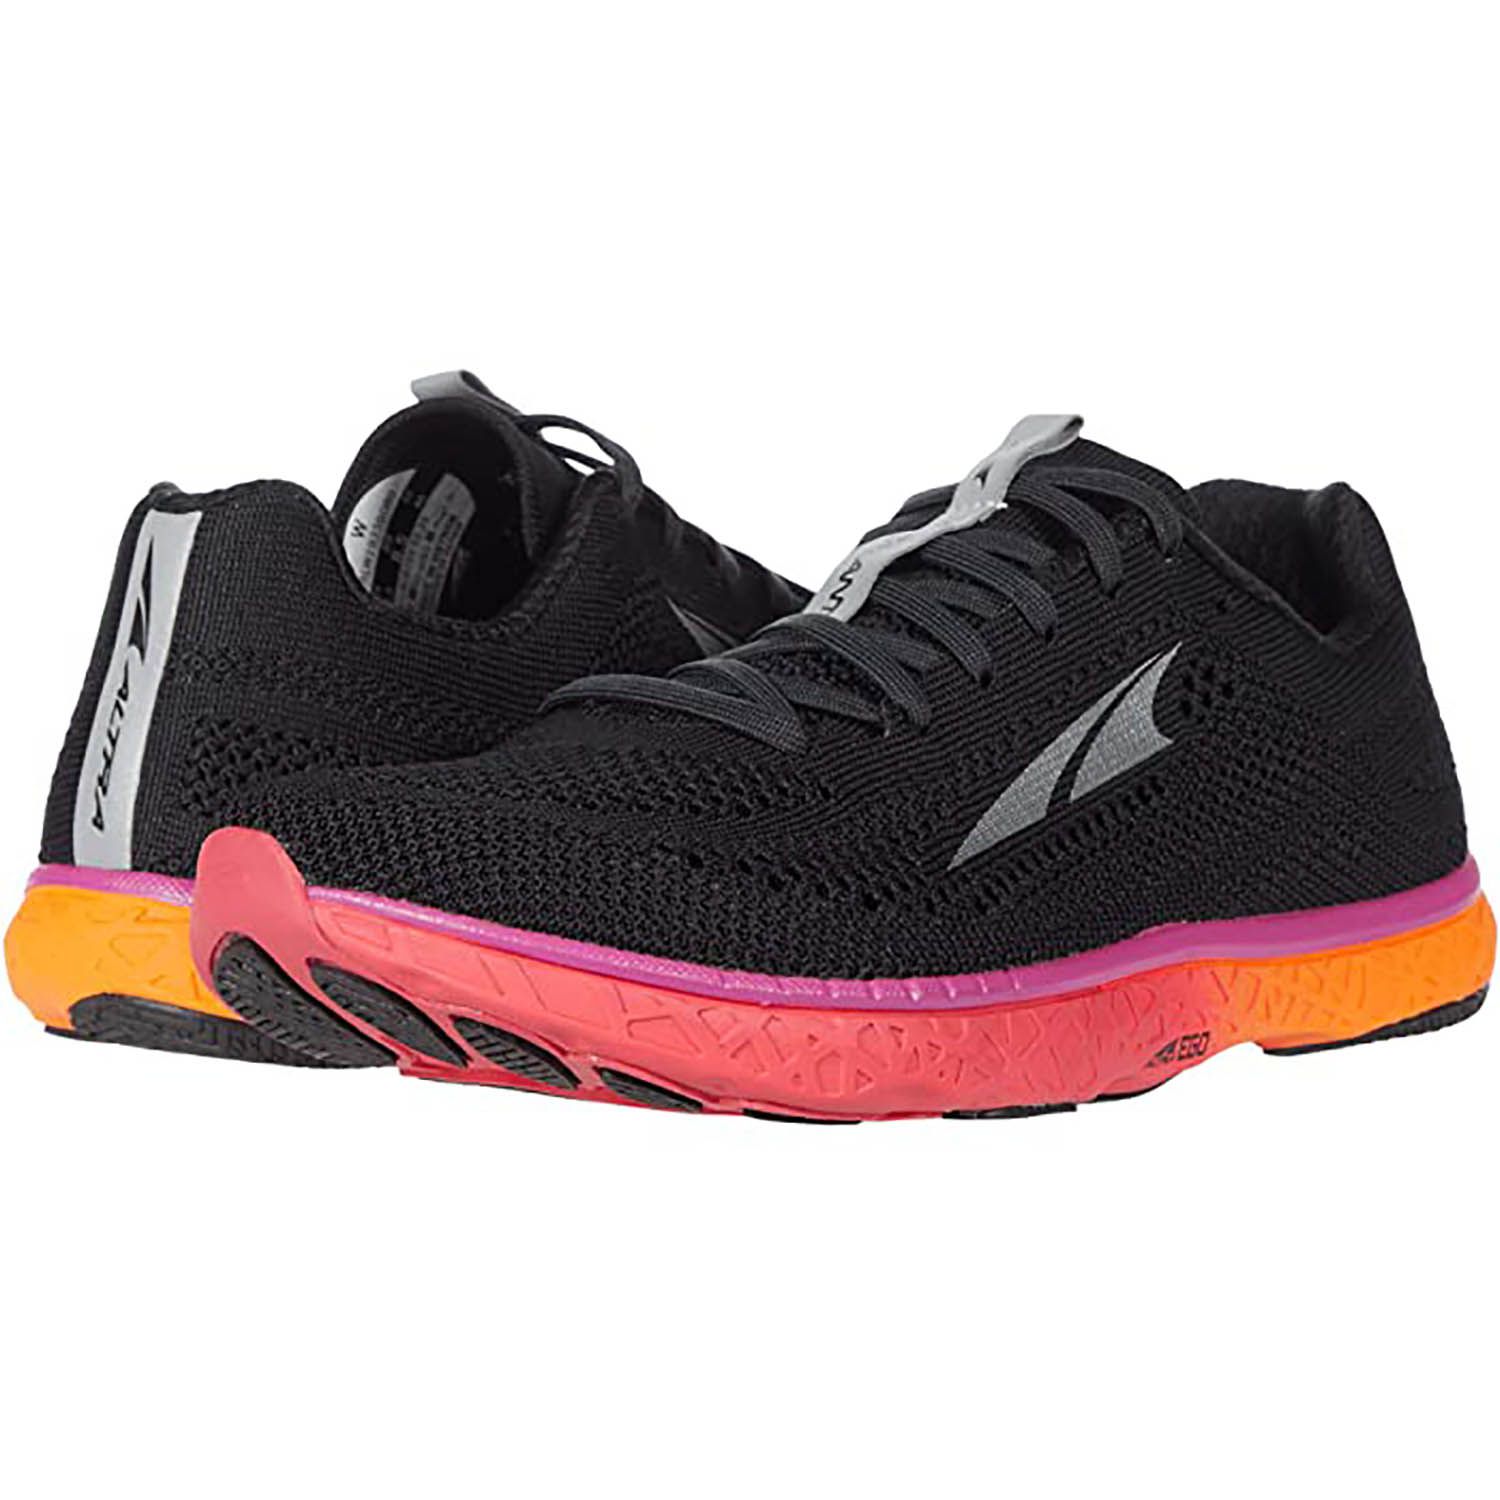 <p>These racing sneakers from Altra Running were specifically made for outdoor running and are perfect for distance runners who only need moderate arch support. These athletic shoes have a zero-drop heel — meaning the heel is the same height as the ball of the foot — which Kor considers to be one of the most important features to look for in running shoes. They also have a breathable lining, slight cushioning, and flexible response for a super lightweight feel on your feet. With an APMA seal of approval, Altra is a well-known brand in the running community, so you can trust that these shoes will be top-notch. (Related: The New Nike Free RN 5.0 Shoes Will Make You Feel Like You're Running Barefoot)</p>
                            